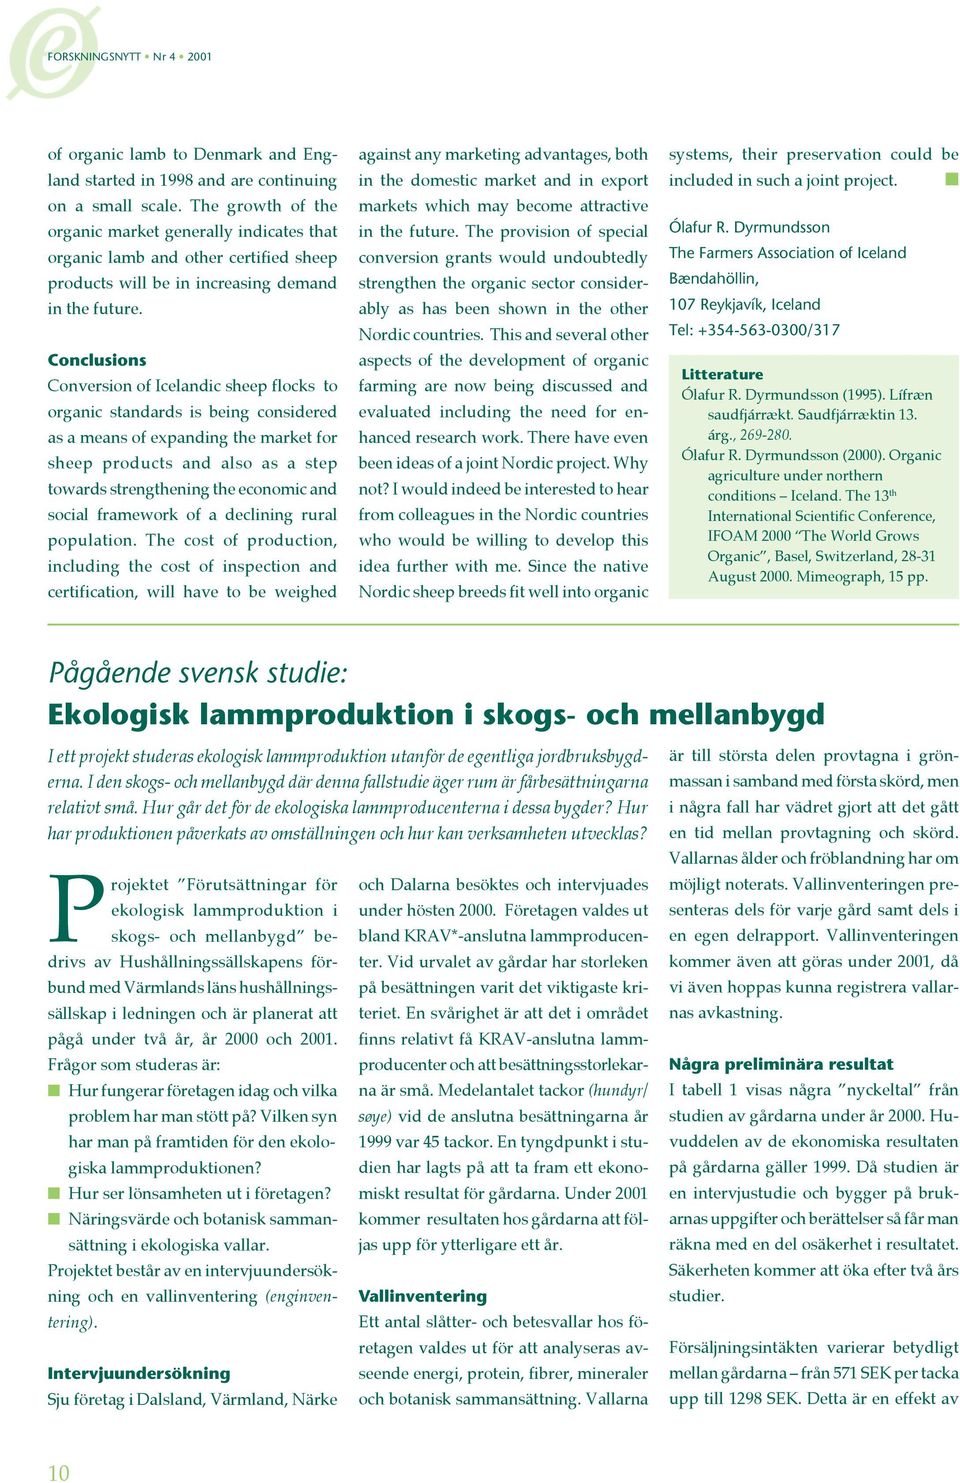 Conclusions Conversion of Icelandic sheep flocks to organic standards is being considered as a means of expanding the market for sheep products and also as a step towards strengthening the economic